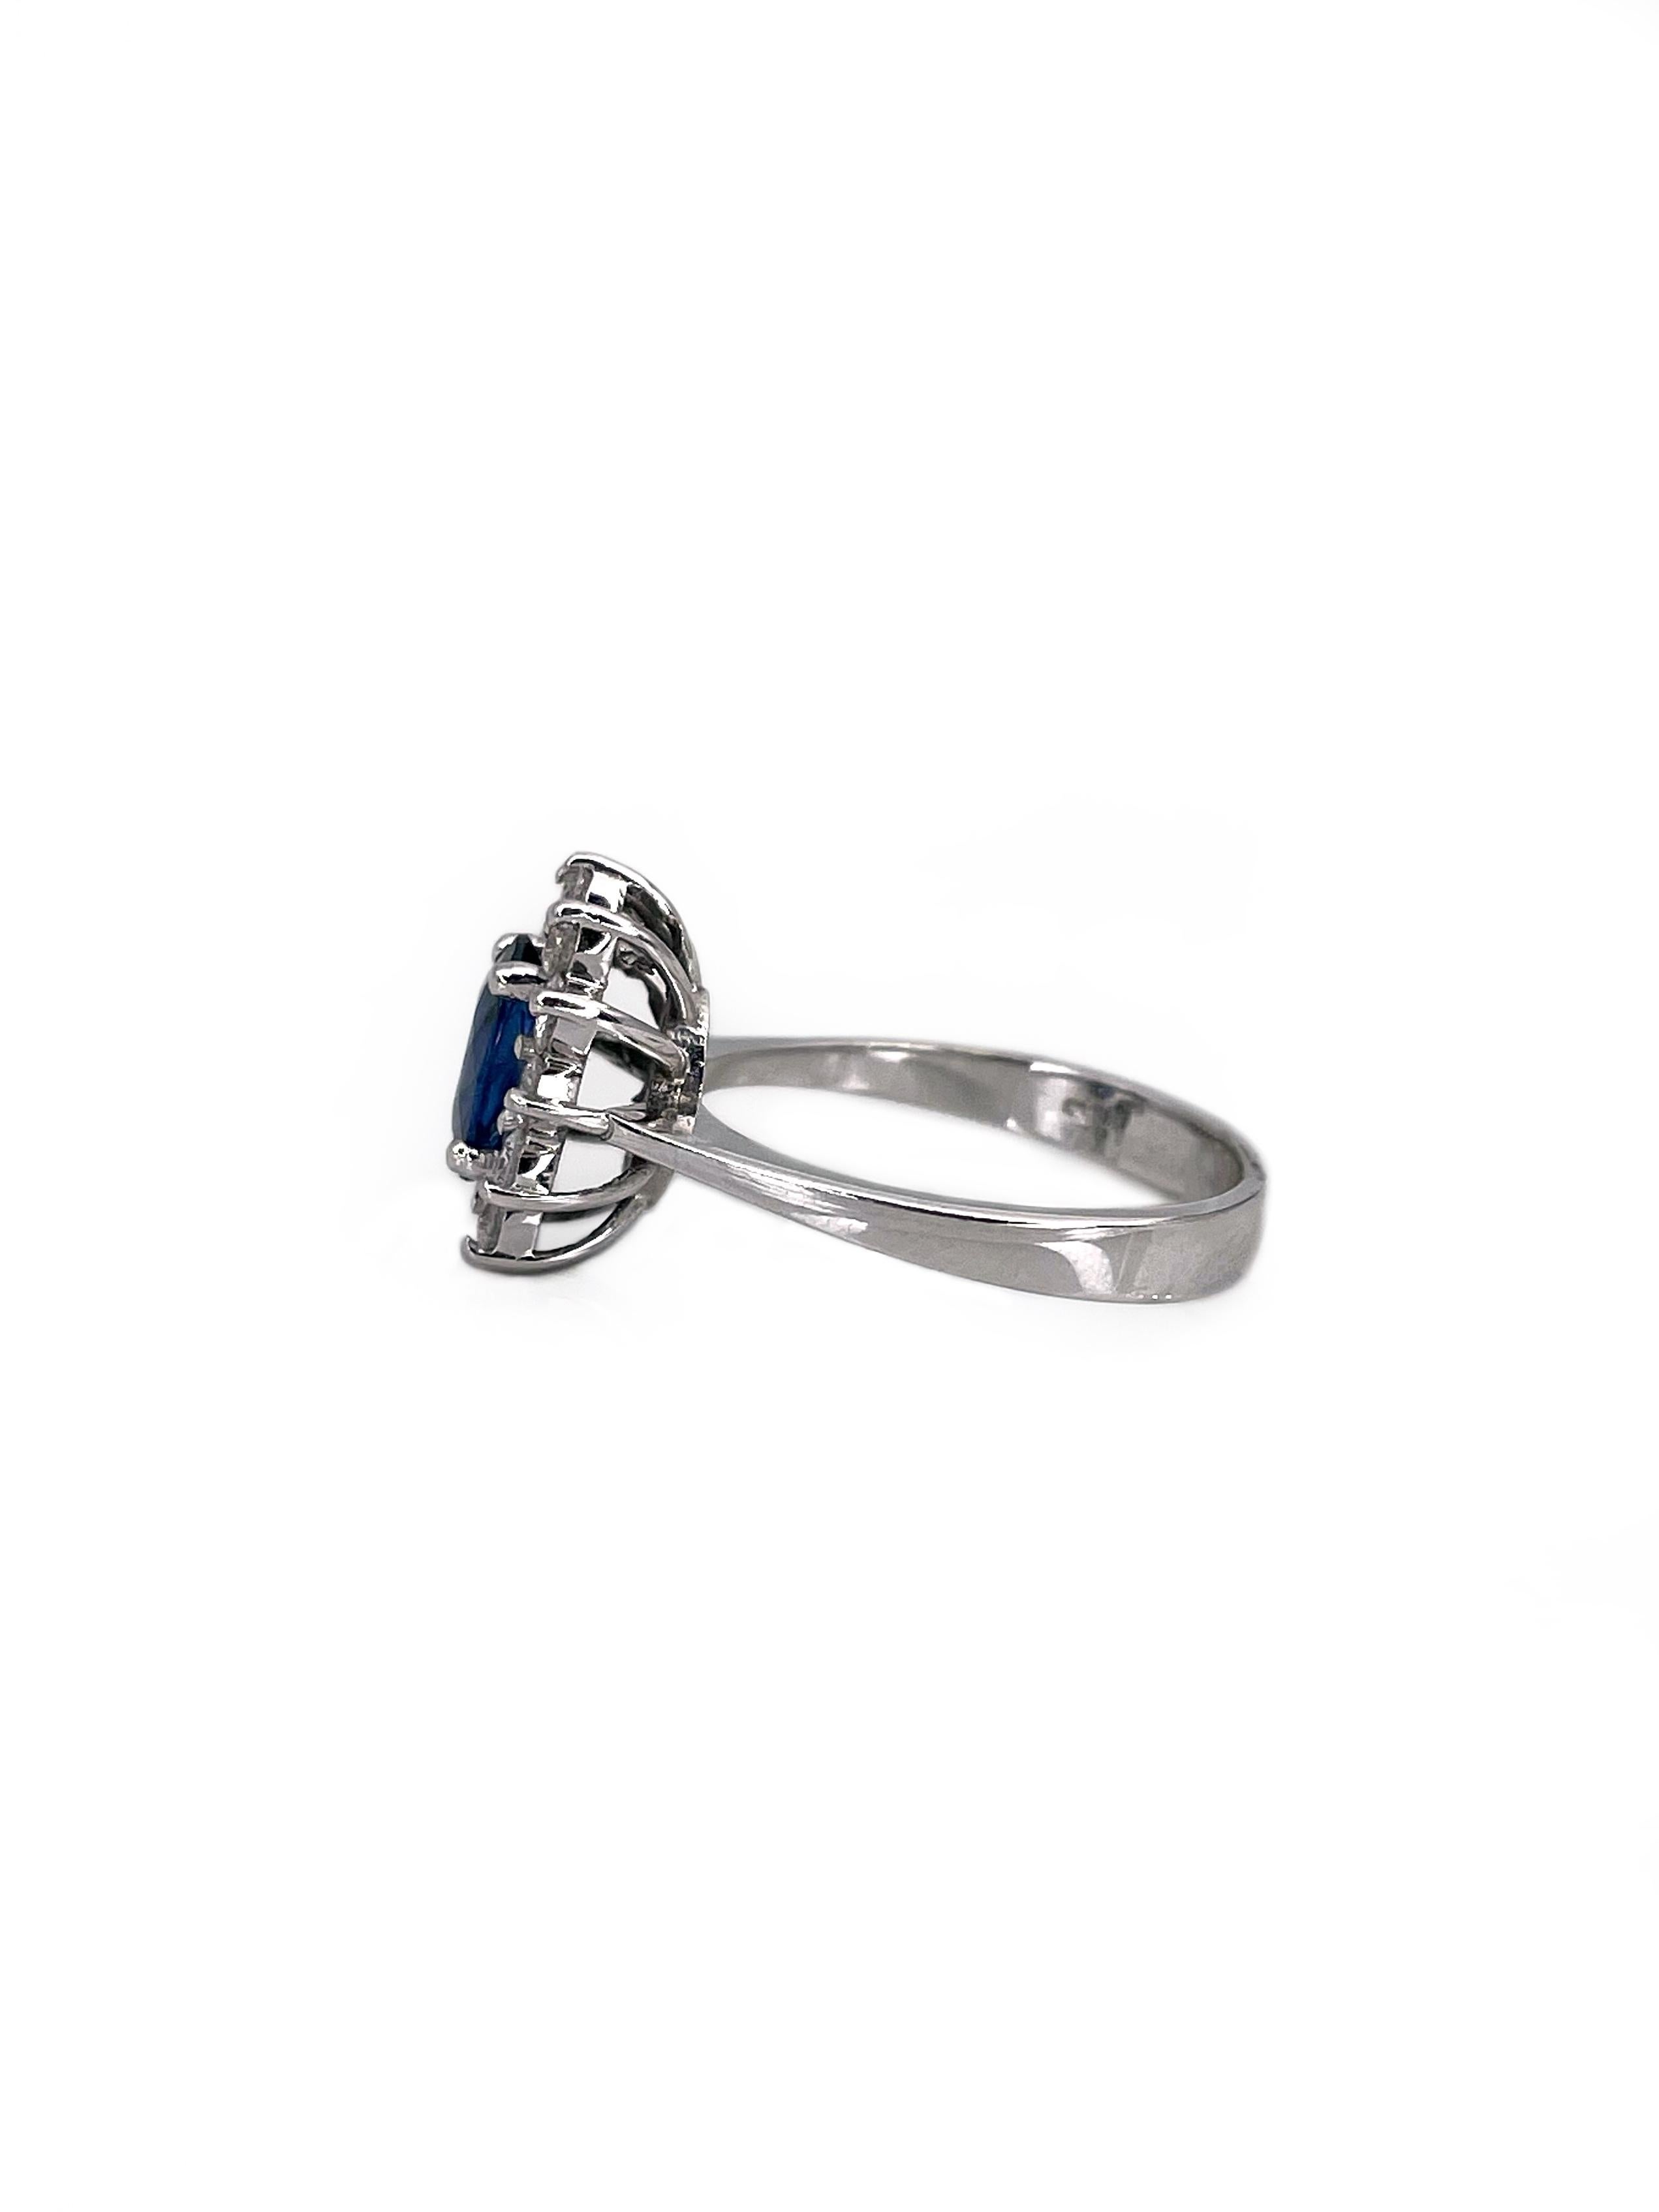 This is a beautiful vintage engagement cluster ring crafted in 18K white gold. The piece features 1.50ct oval blue sapphire (H, U). The gem is surrounded by 12 brilliant cut diamonds (TW 0.60ct, RW, VS-P1). 

Weight: 4.40g
Size: 17 (US